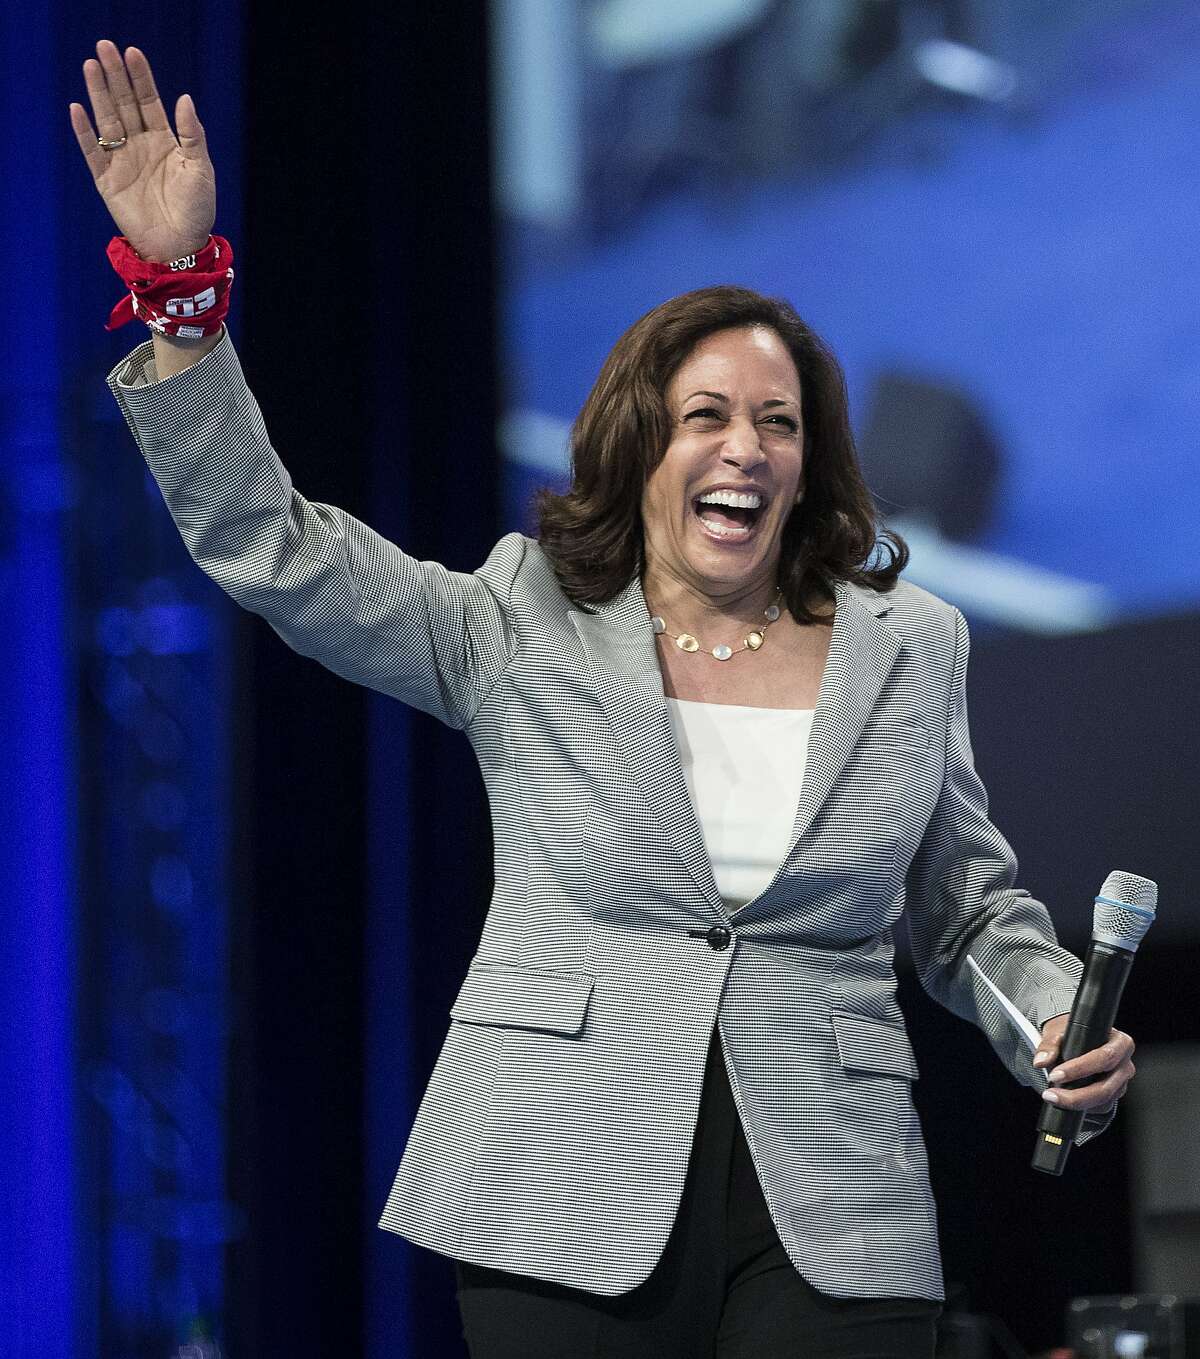 Democratic presidential hopeful, California Sen. Kamala Harris, waves as she arrives on stage to speak during the National Education Association Strong Public Schools Presidential Forum on Friday, July 5, 2019, in Houston.